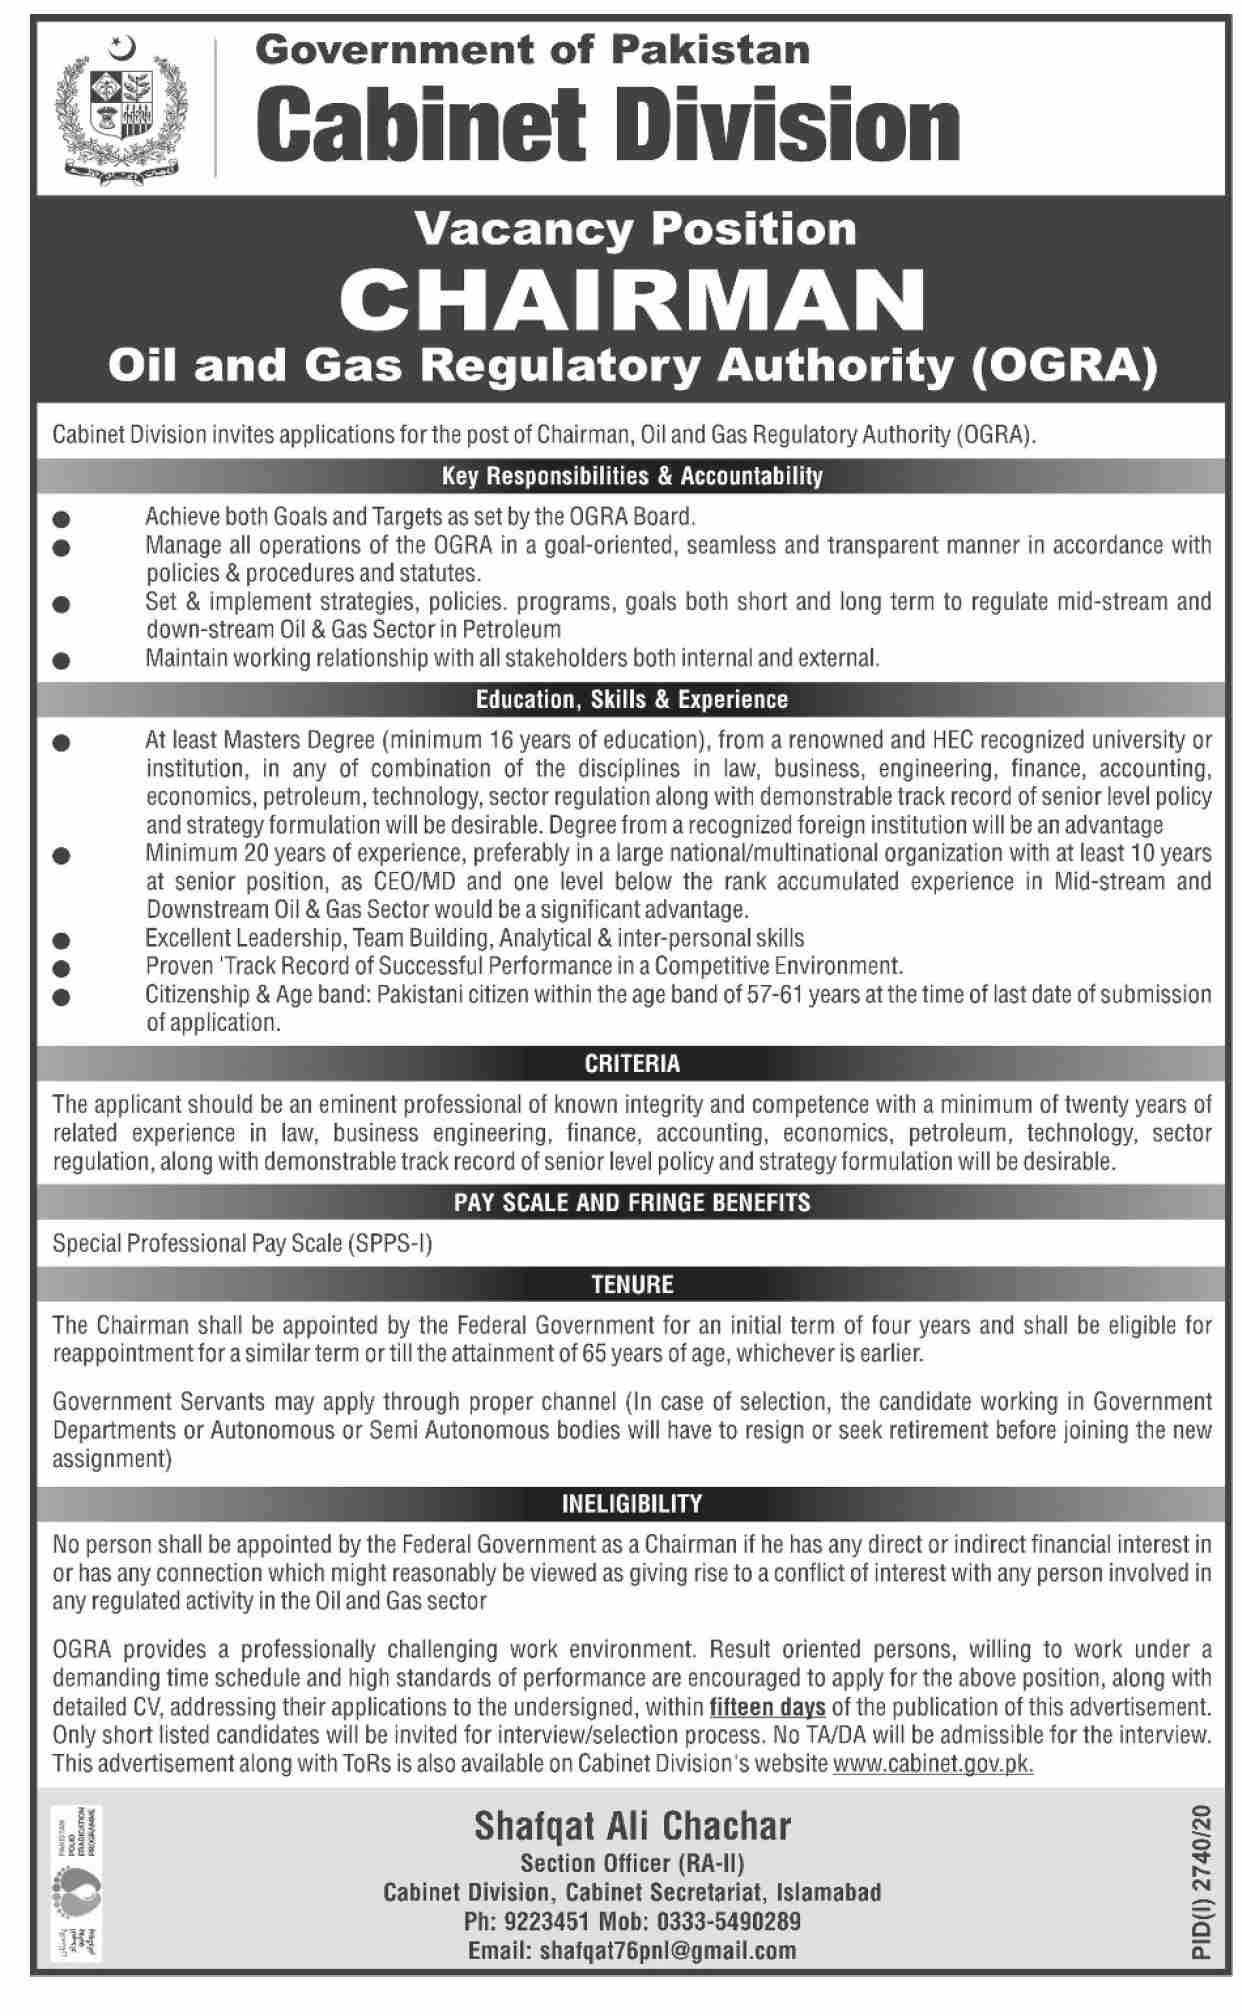 Government of Pakistan Cabinet Division Jobs 2020 for Chairman of Oil & Gas Regulatory Authority (OGRA) Islamabad Latest